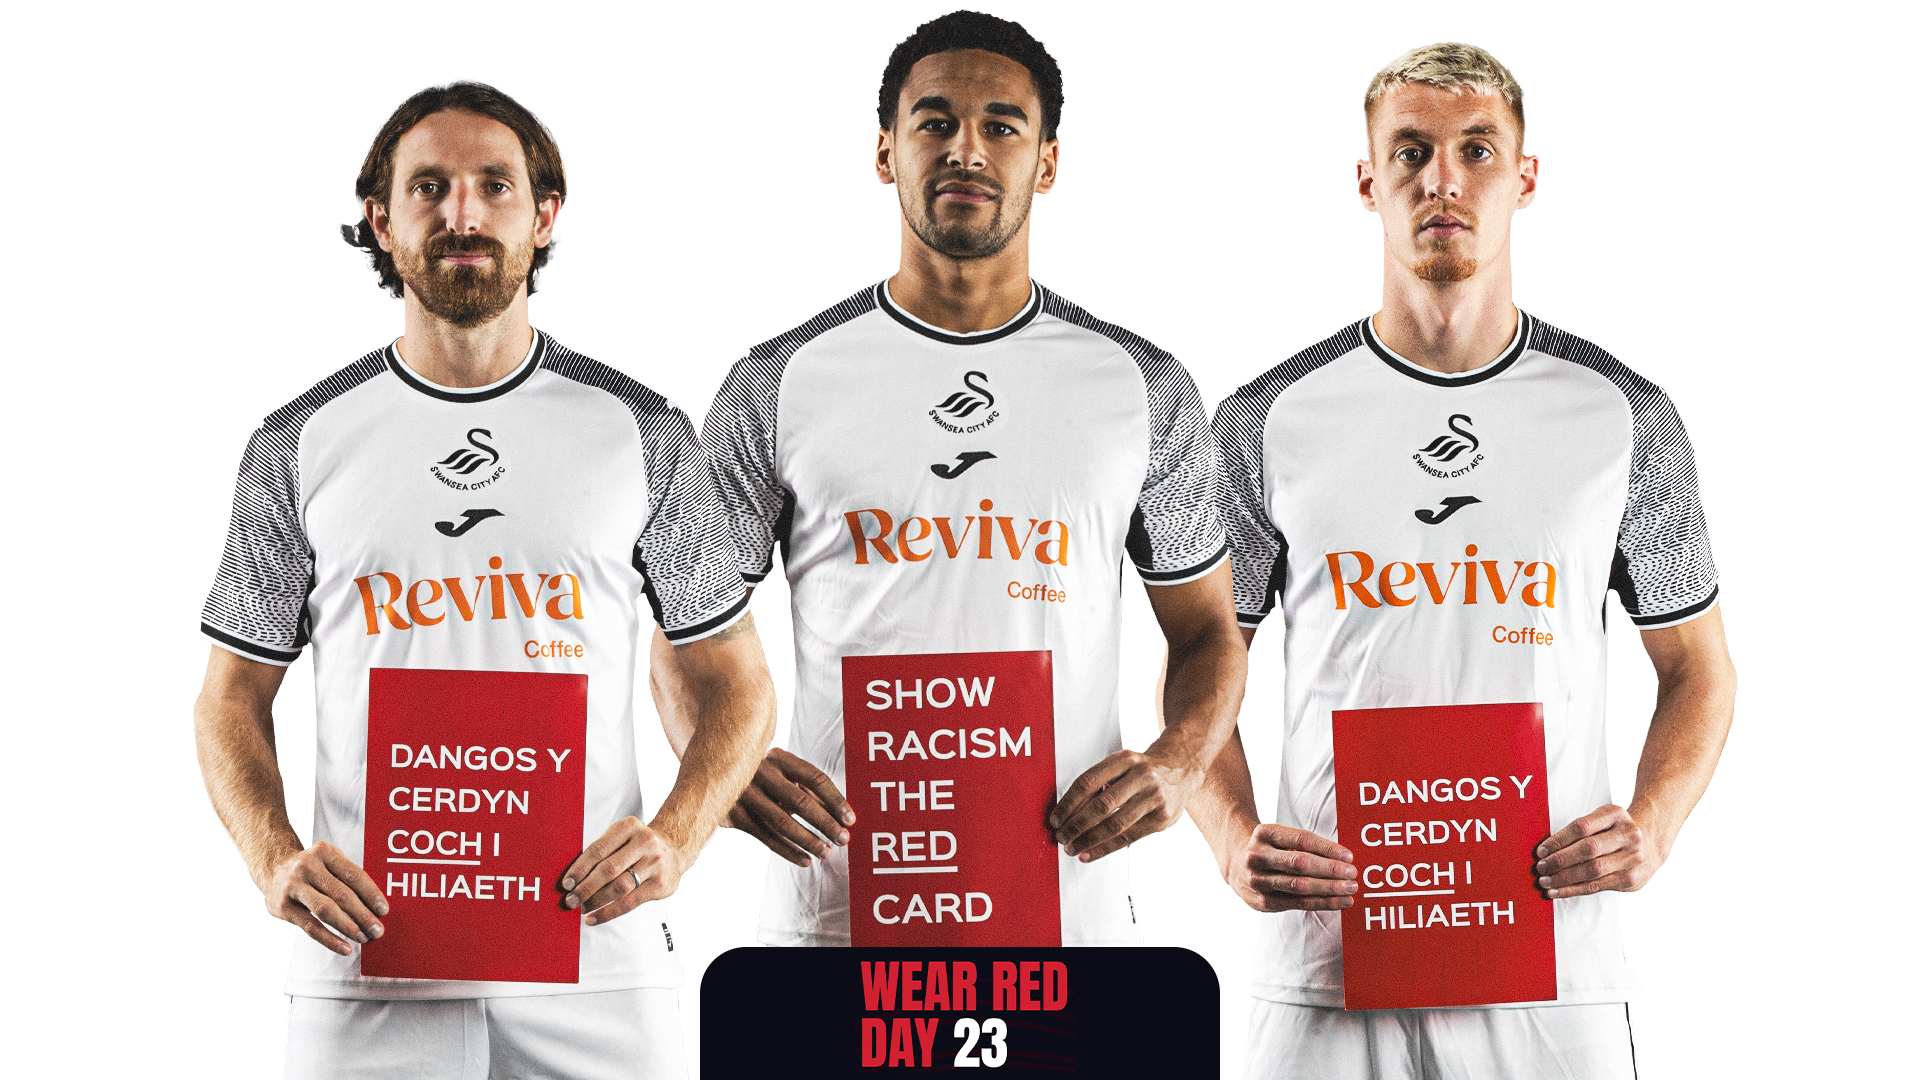 Joe Allen, Ben Cabango and Jay Fulton show support for Show Racism the Red Card